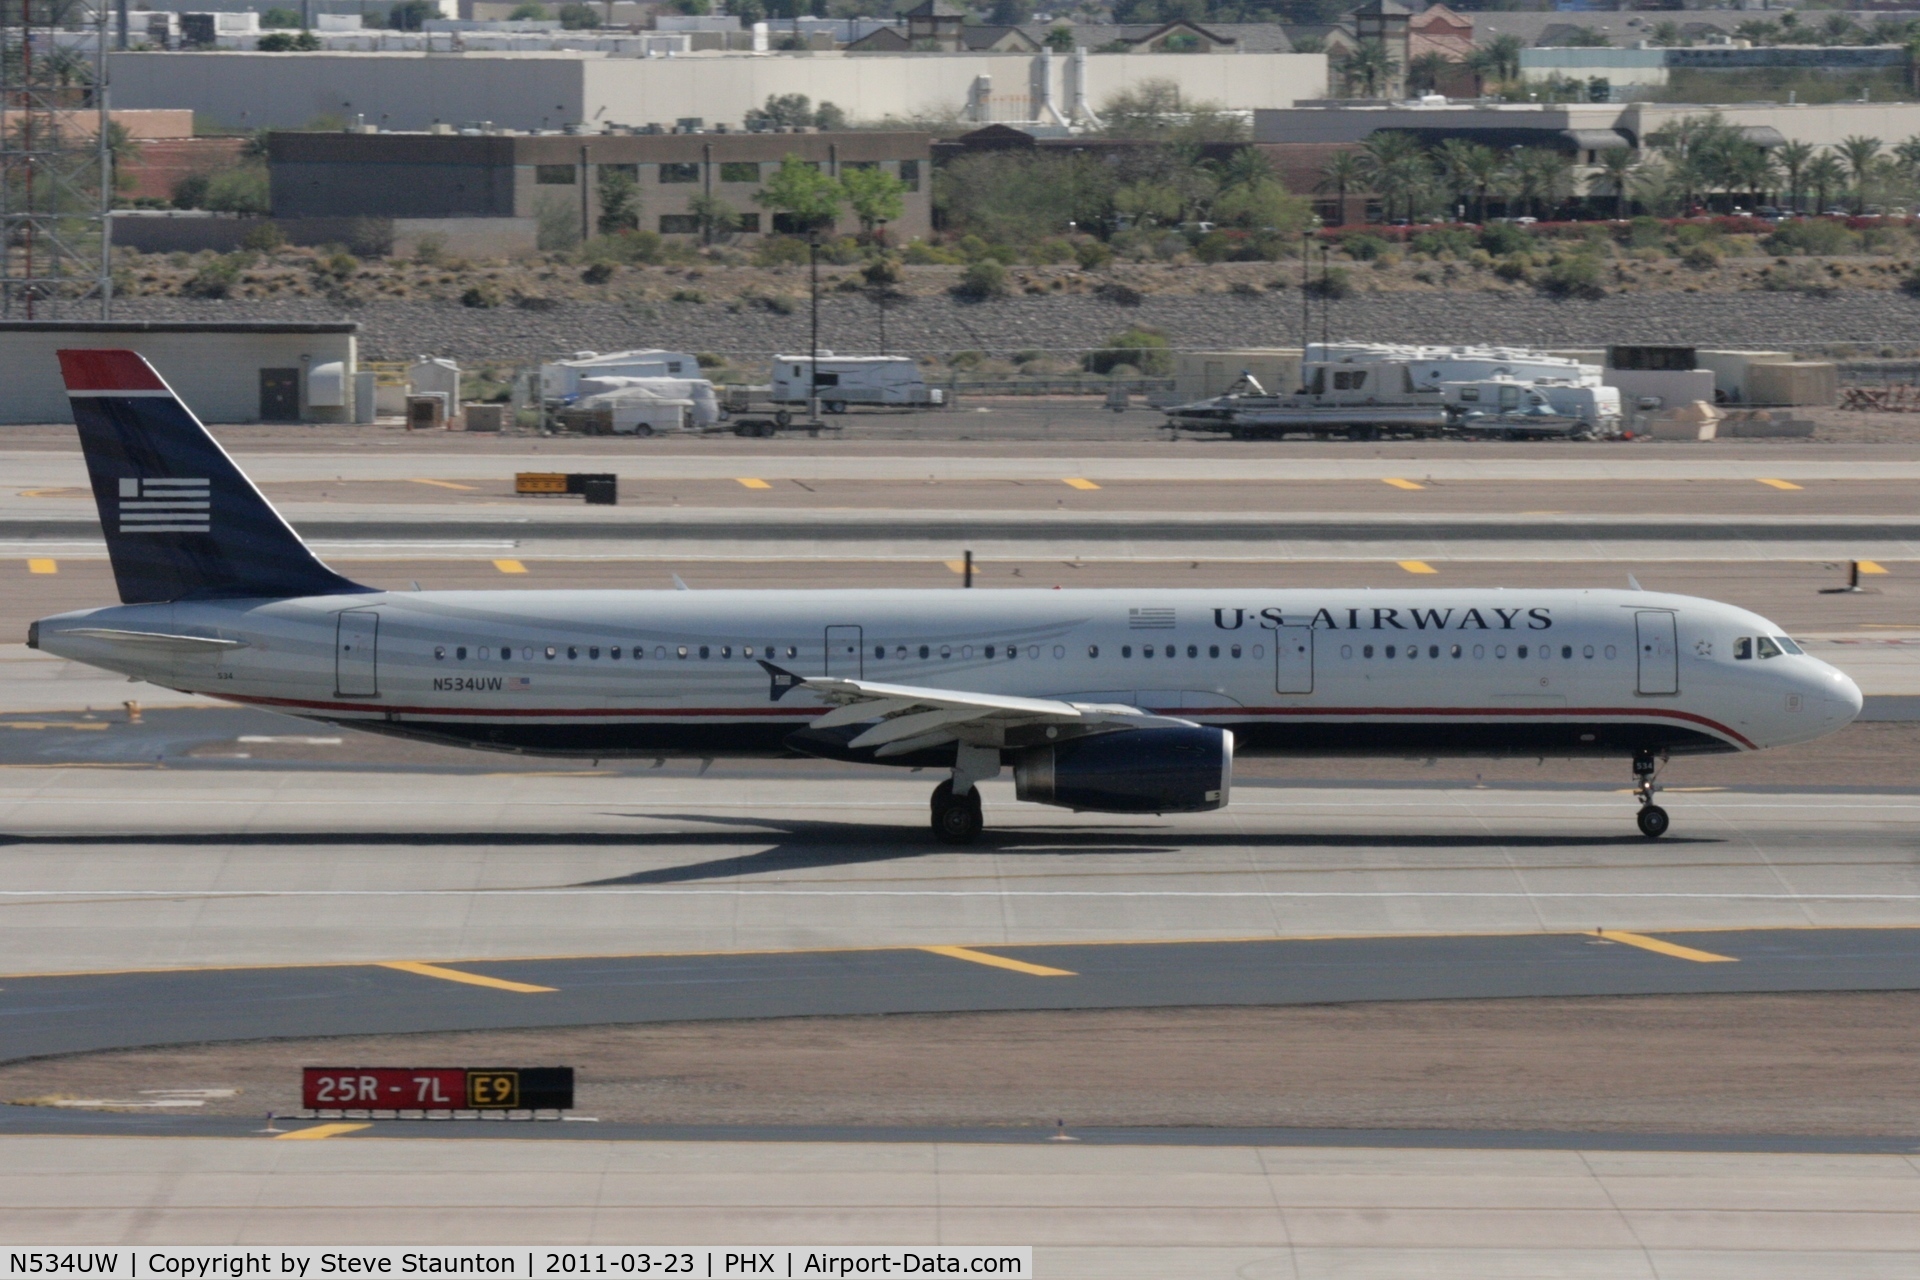 N534UW, 2009 Airbus A321-231 C/N 3989, Taken at Phoenix Sky Harbor Airport, in March 2011 whilst on an Aeroprint Aviation tour